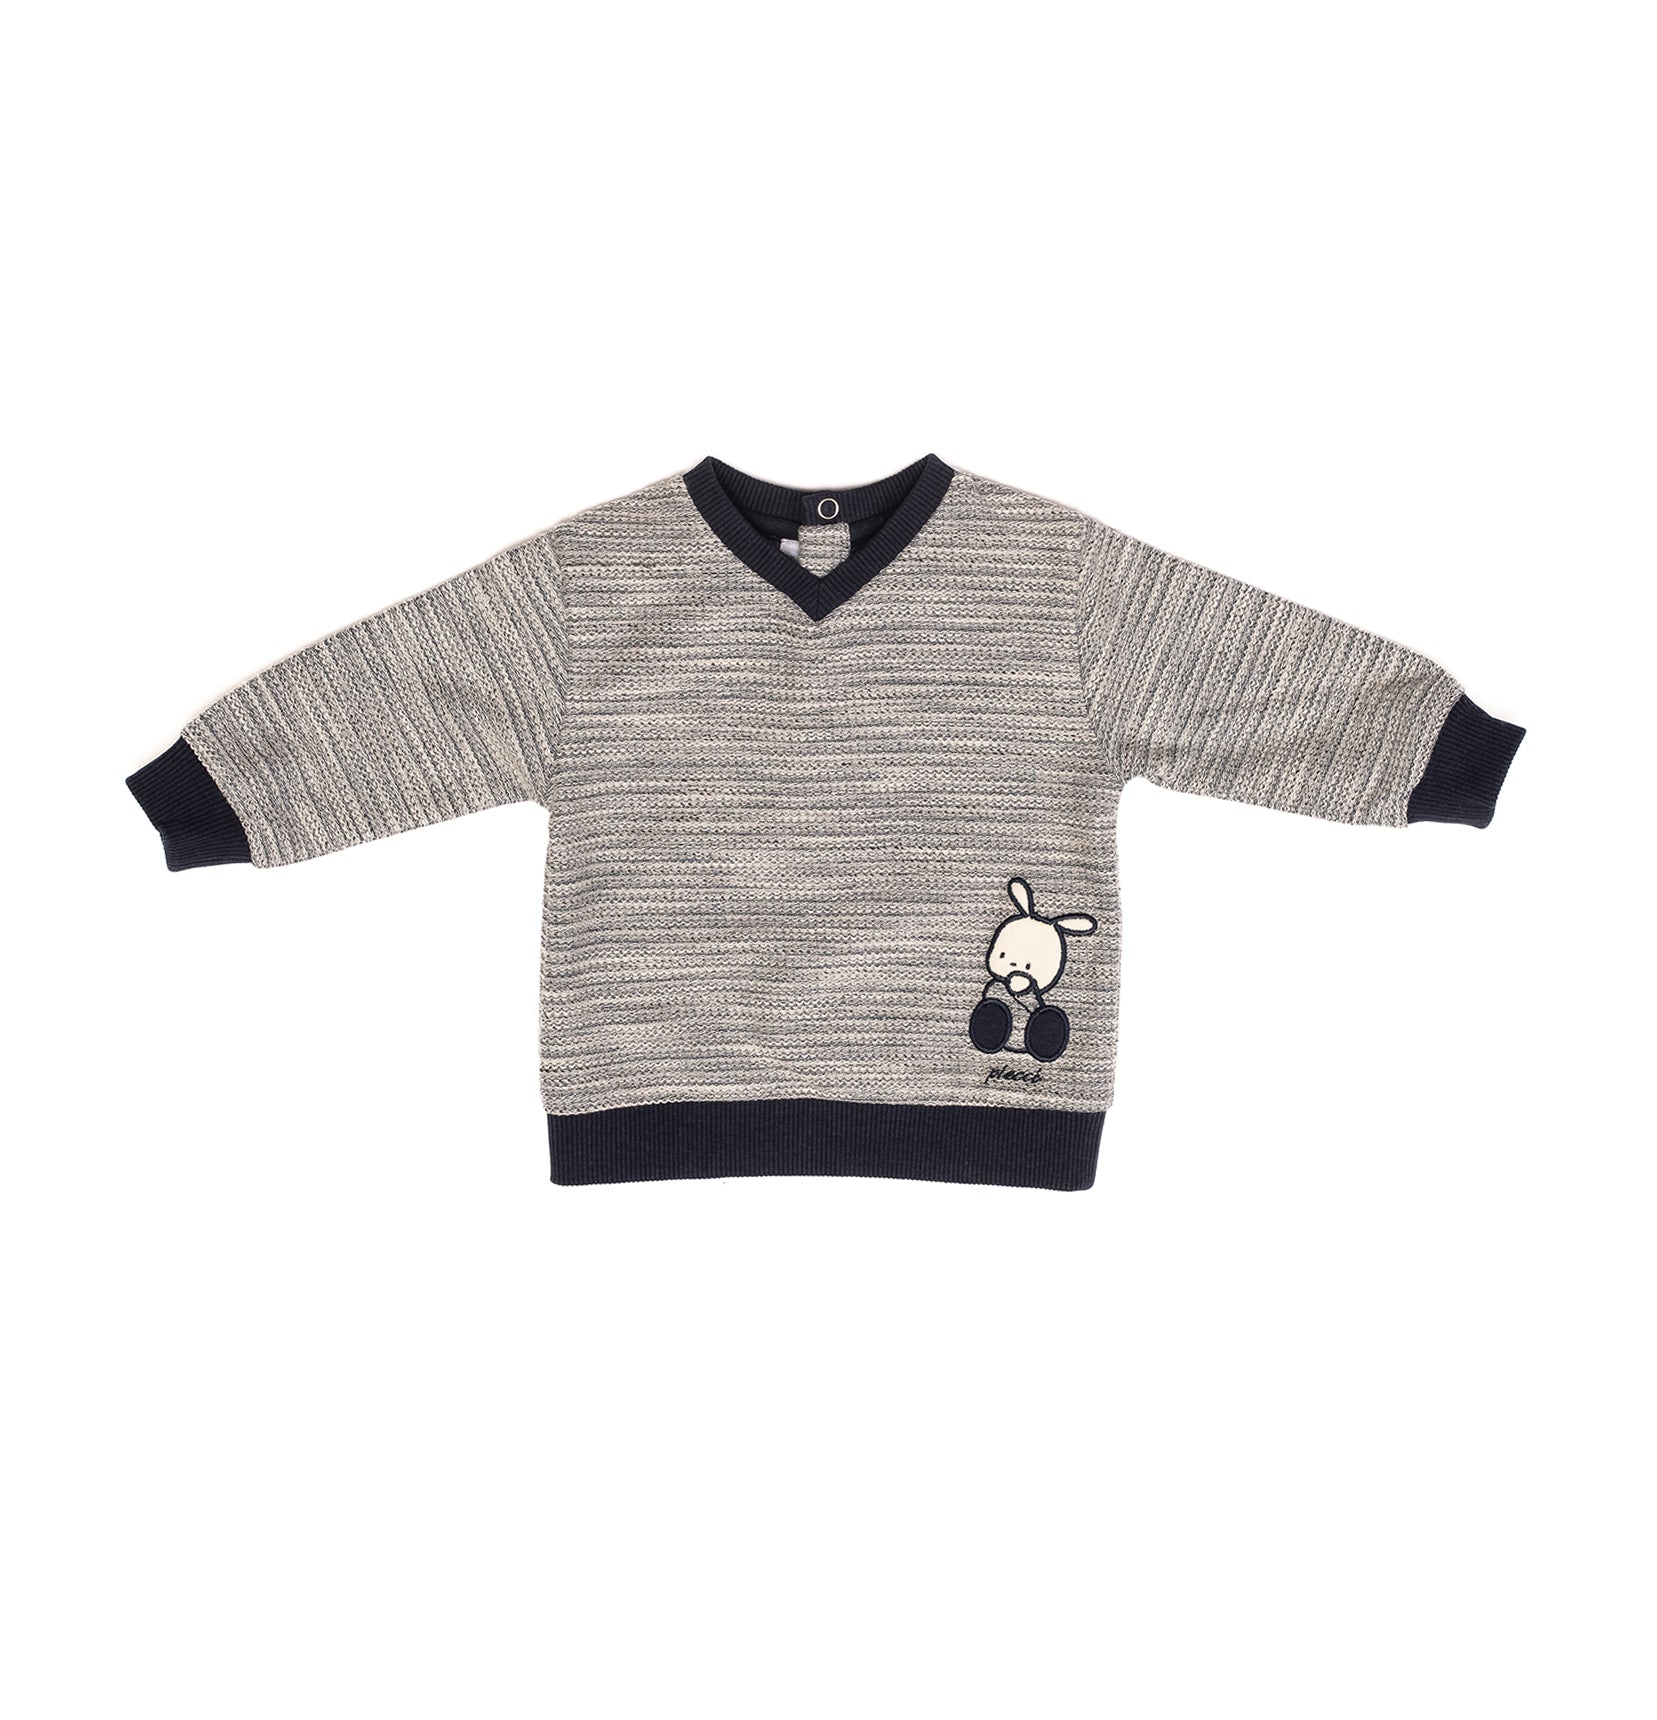 Comfy black and white Babyboy sweatshirt by Pompelo